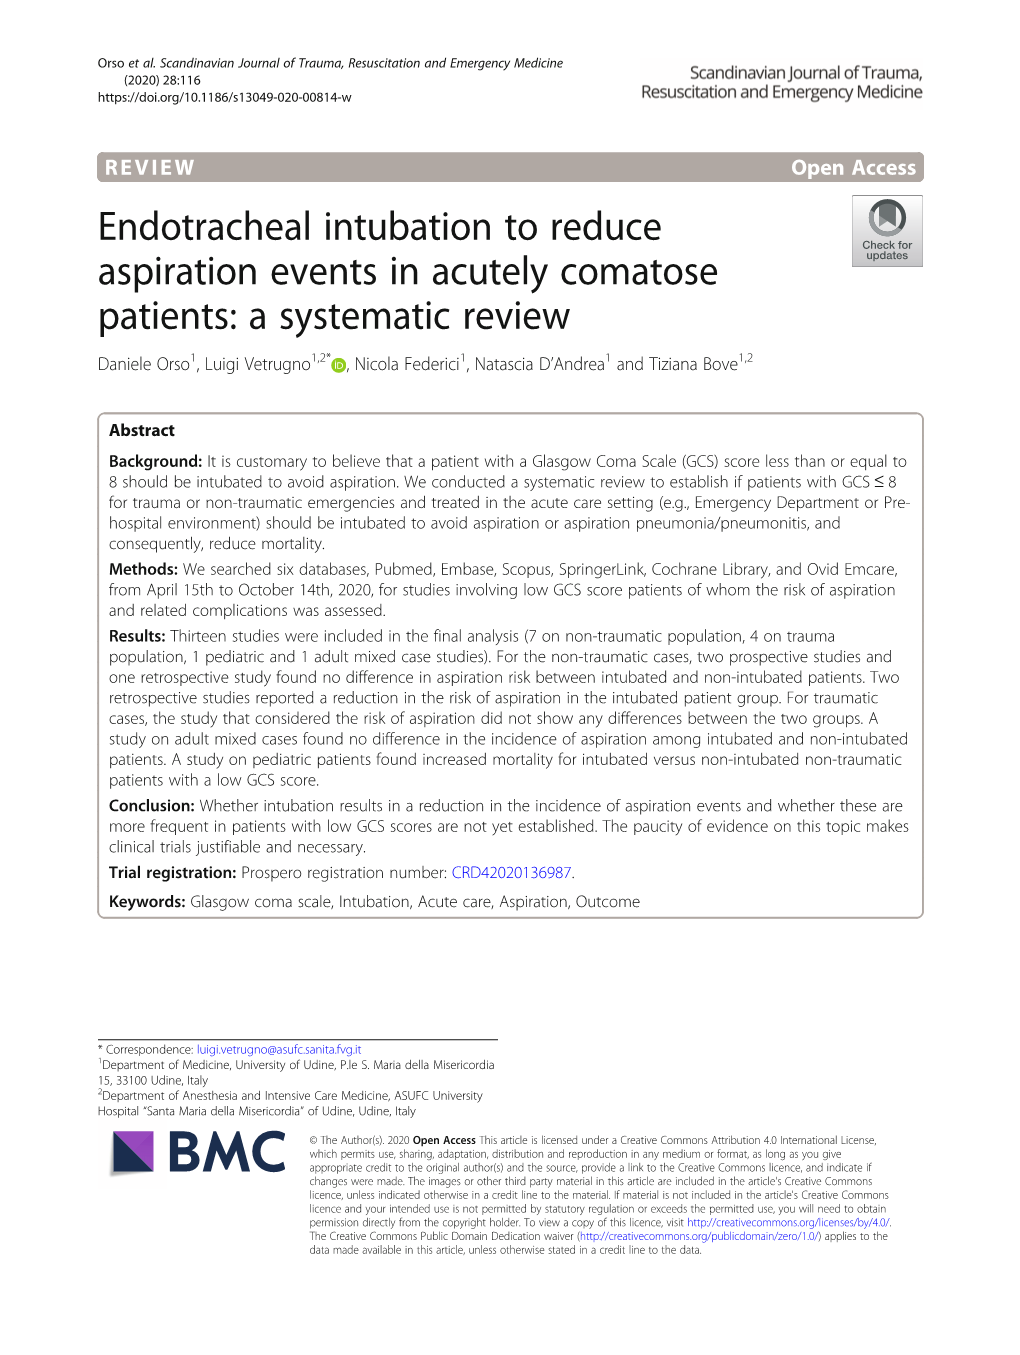 Endotracheal Intubation to Reduce Aspiration Events in Acutely Comatose Patients: a Systematic Review